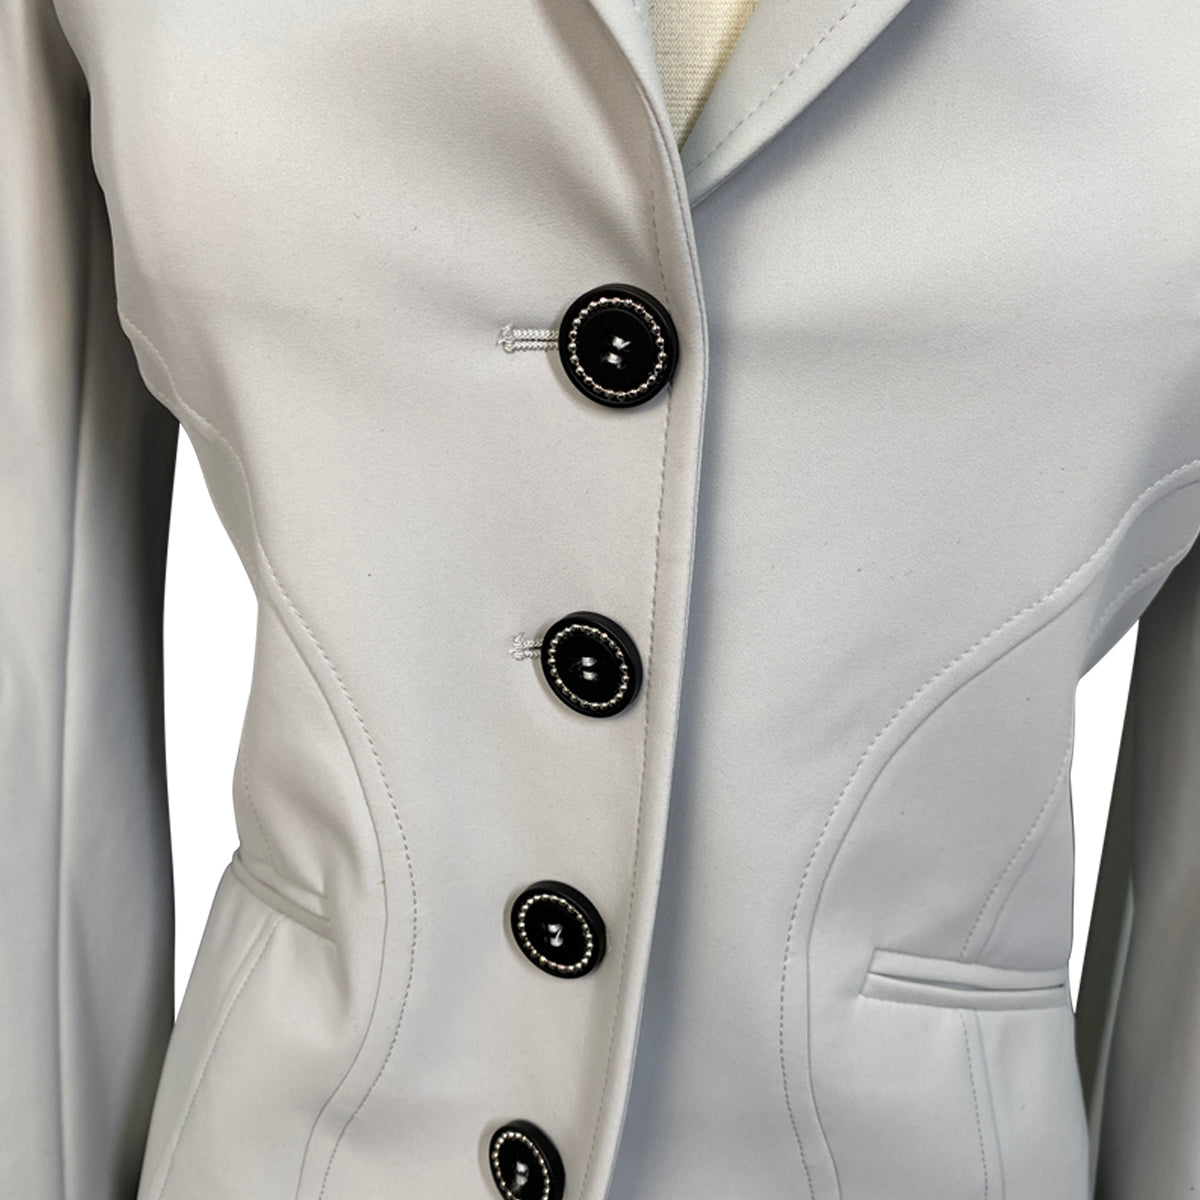 Equiline 'Gerby' B-Move Show Coat in Ice